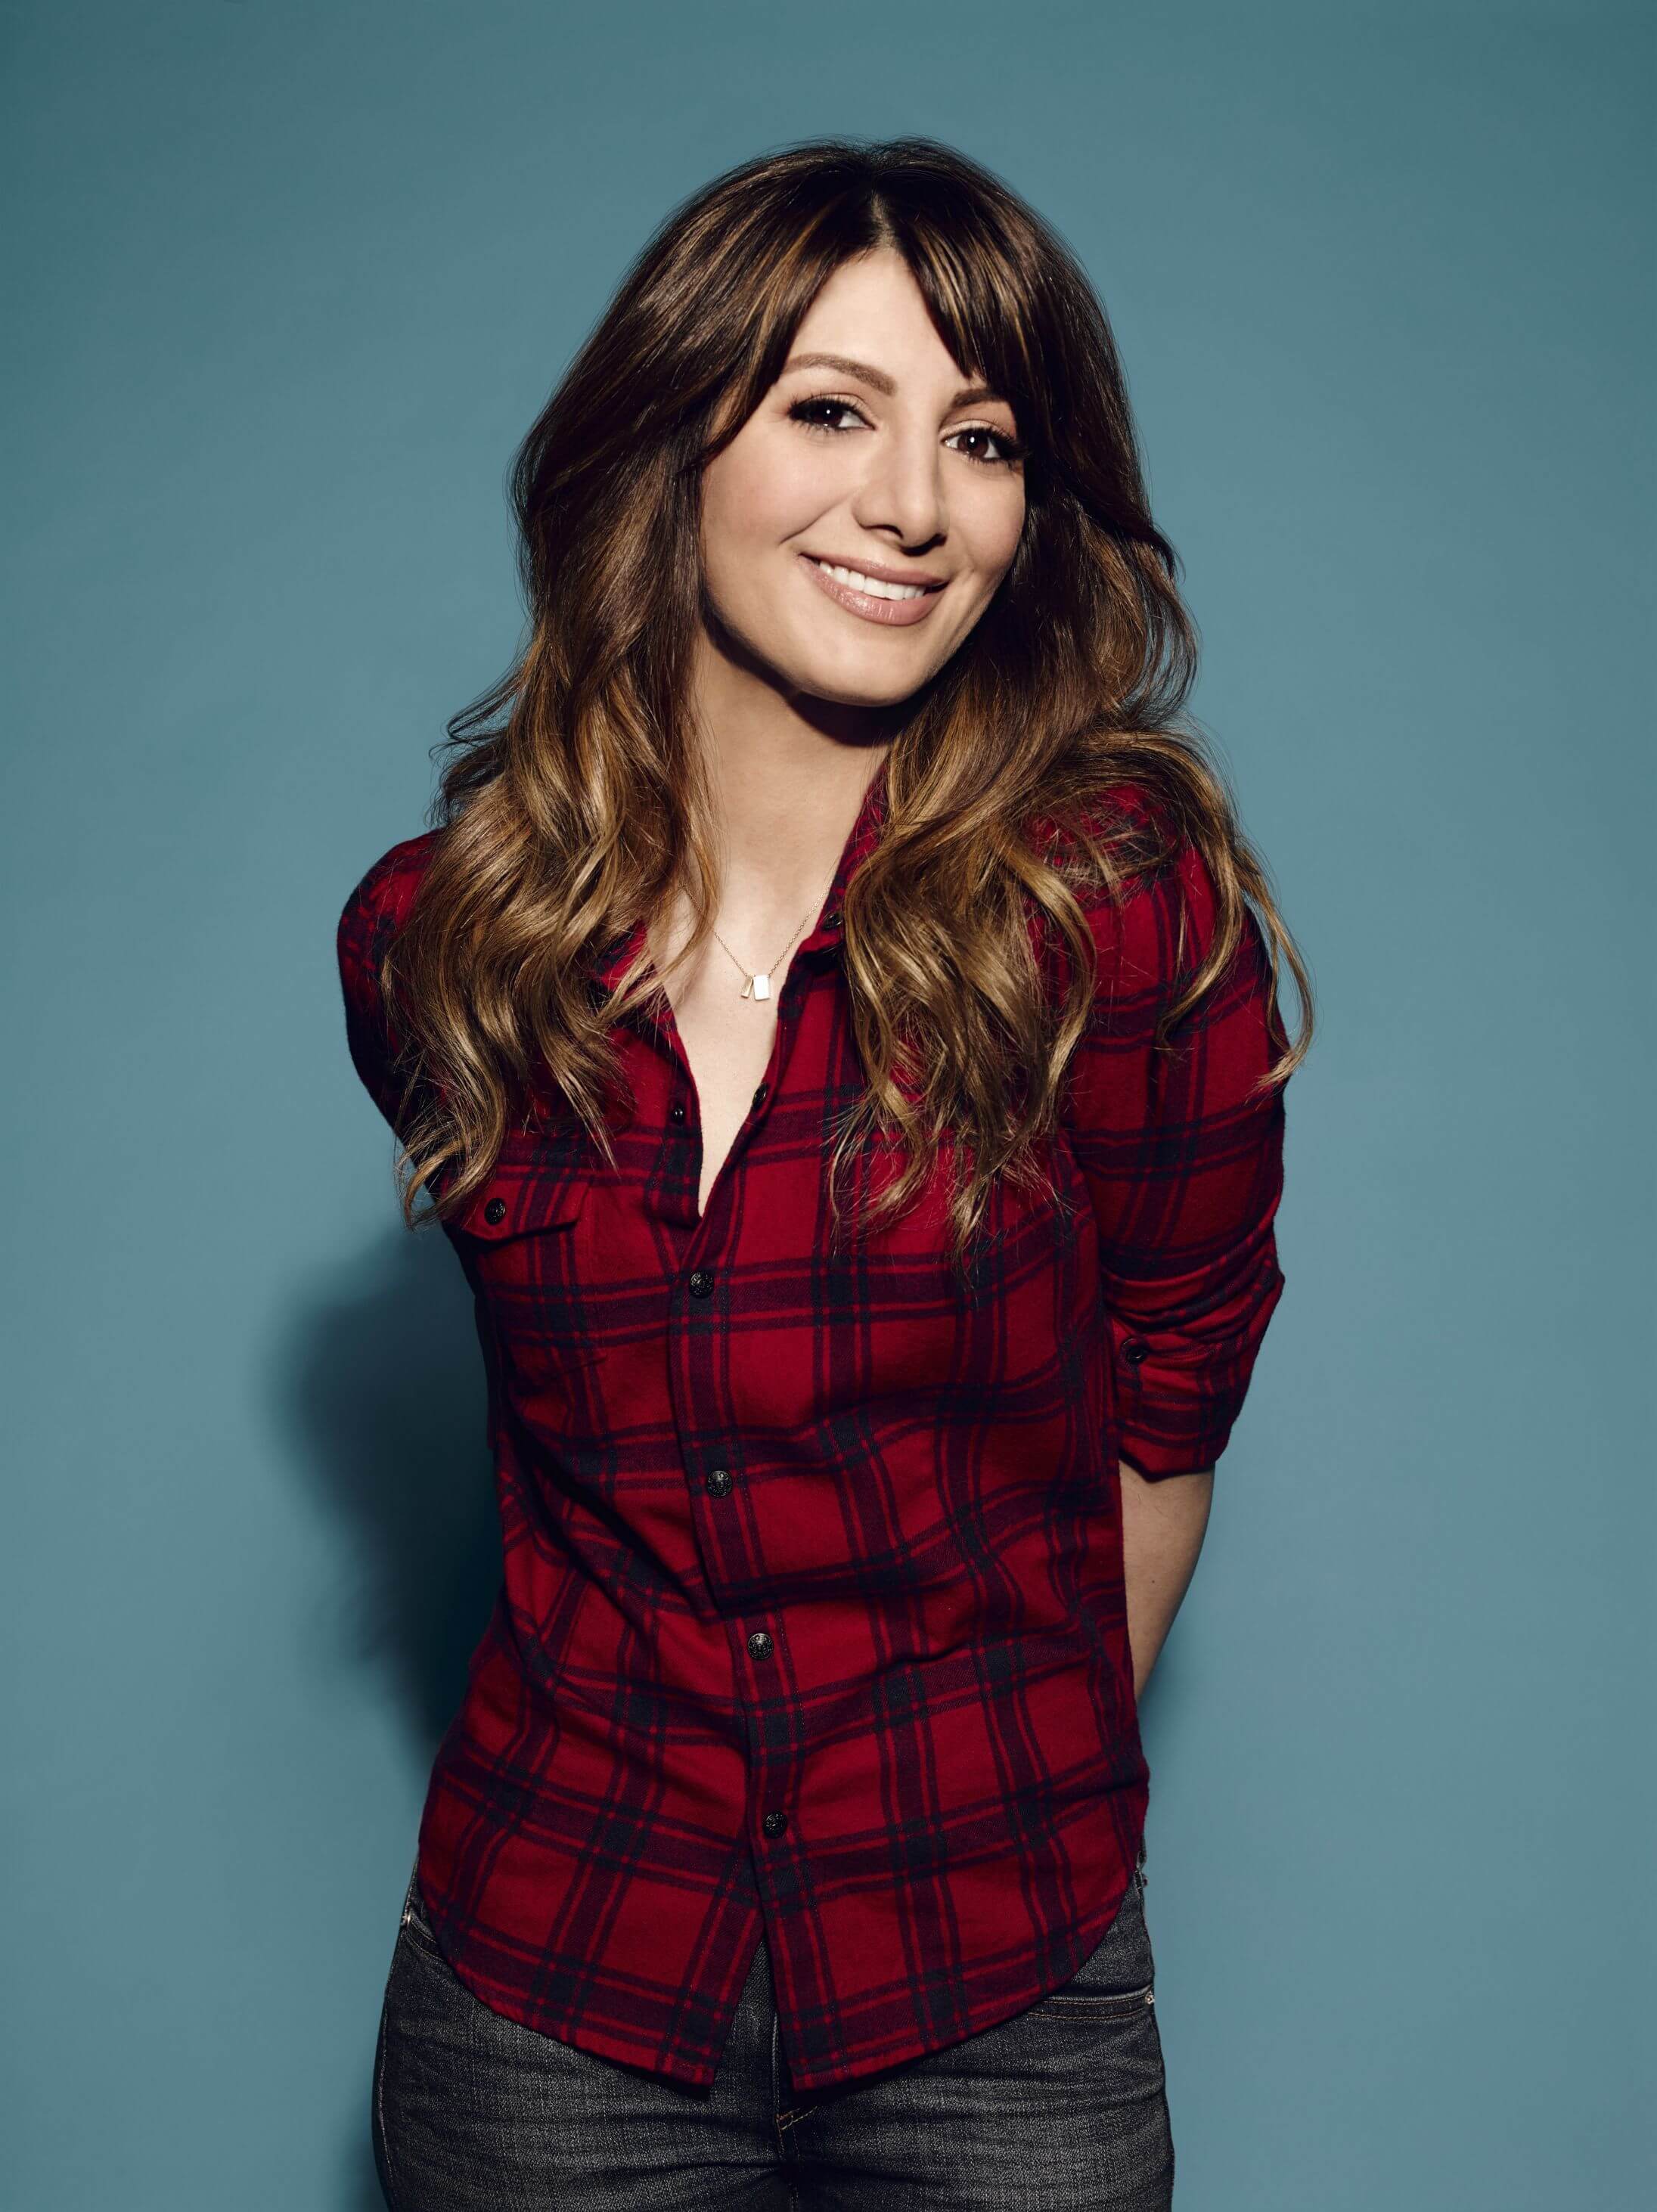 Hot Picture Of Nasim Pedrad Are Delight For Fans